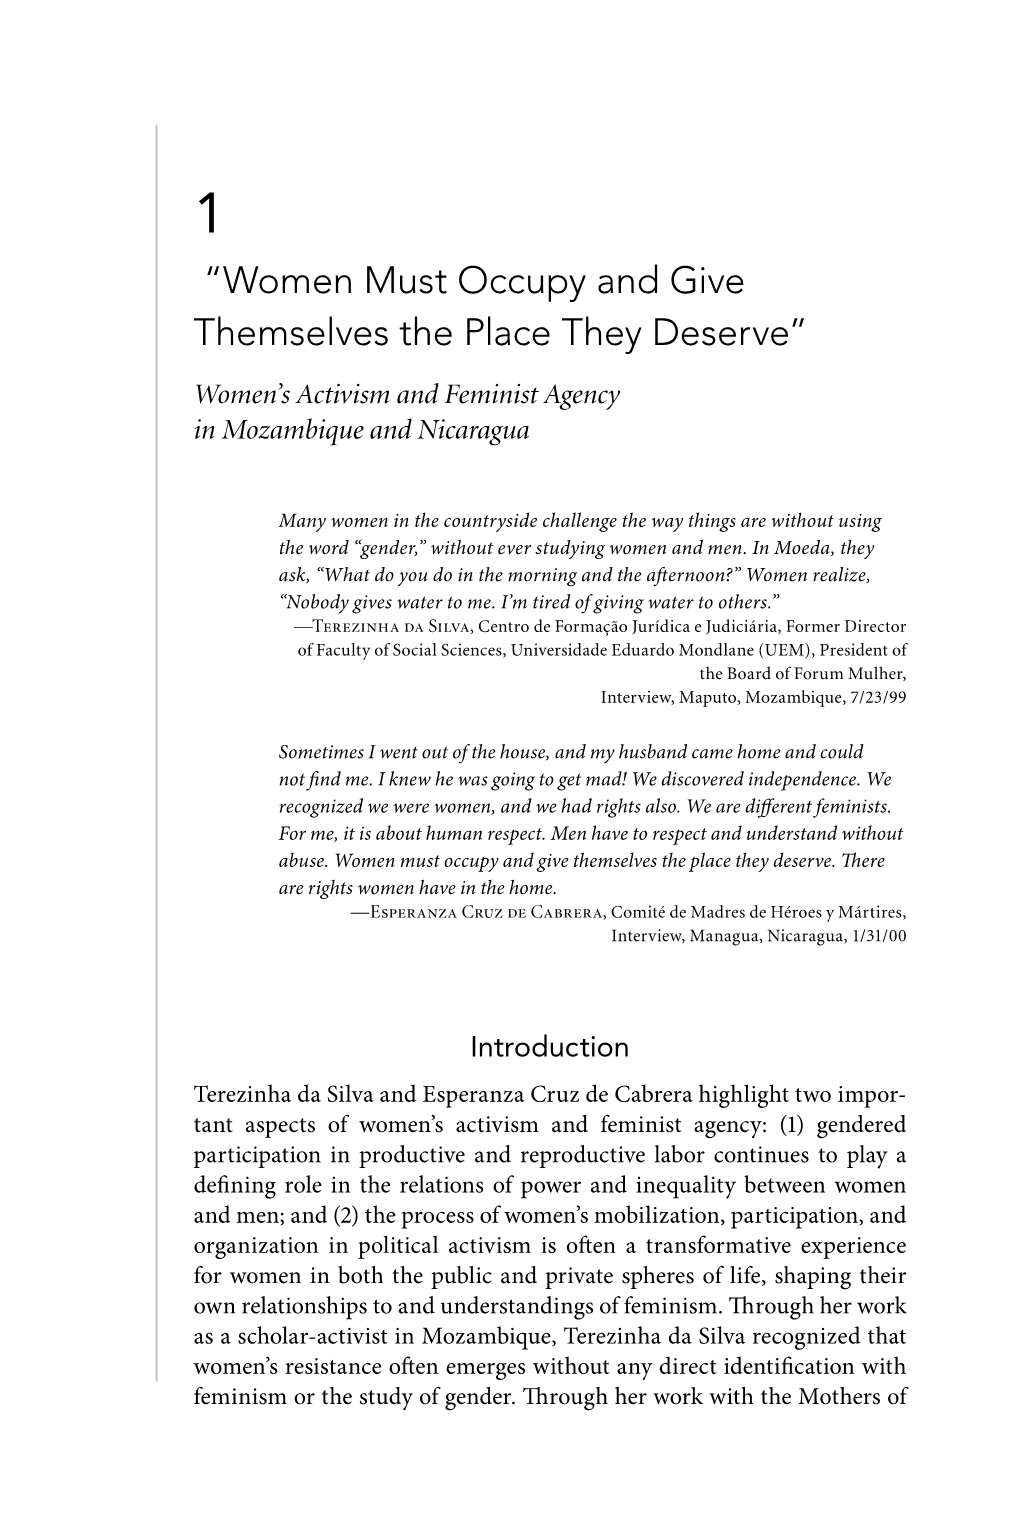 Women's Activism and Feminis Agency in Mozambique And